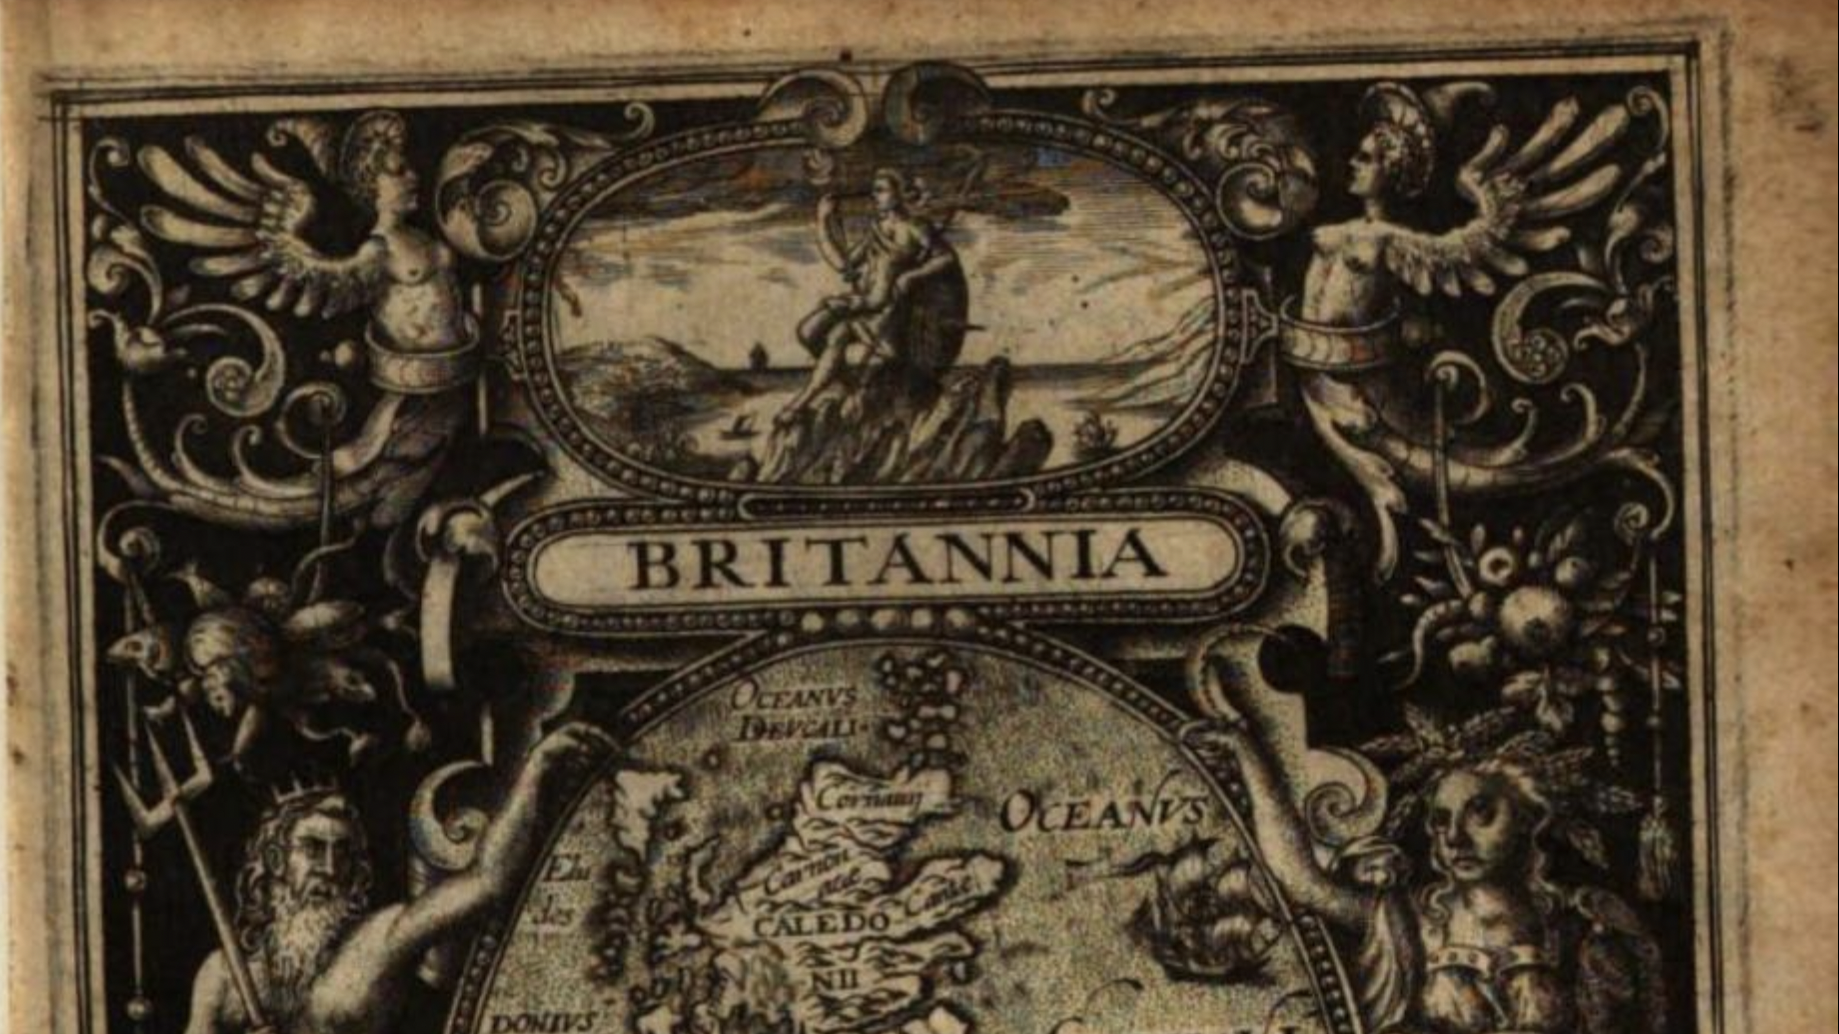 Camden's Britannia from a Latin edition printed in the year 1600, held by the National Central Library of Rome. Available via archive.org.